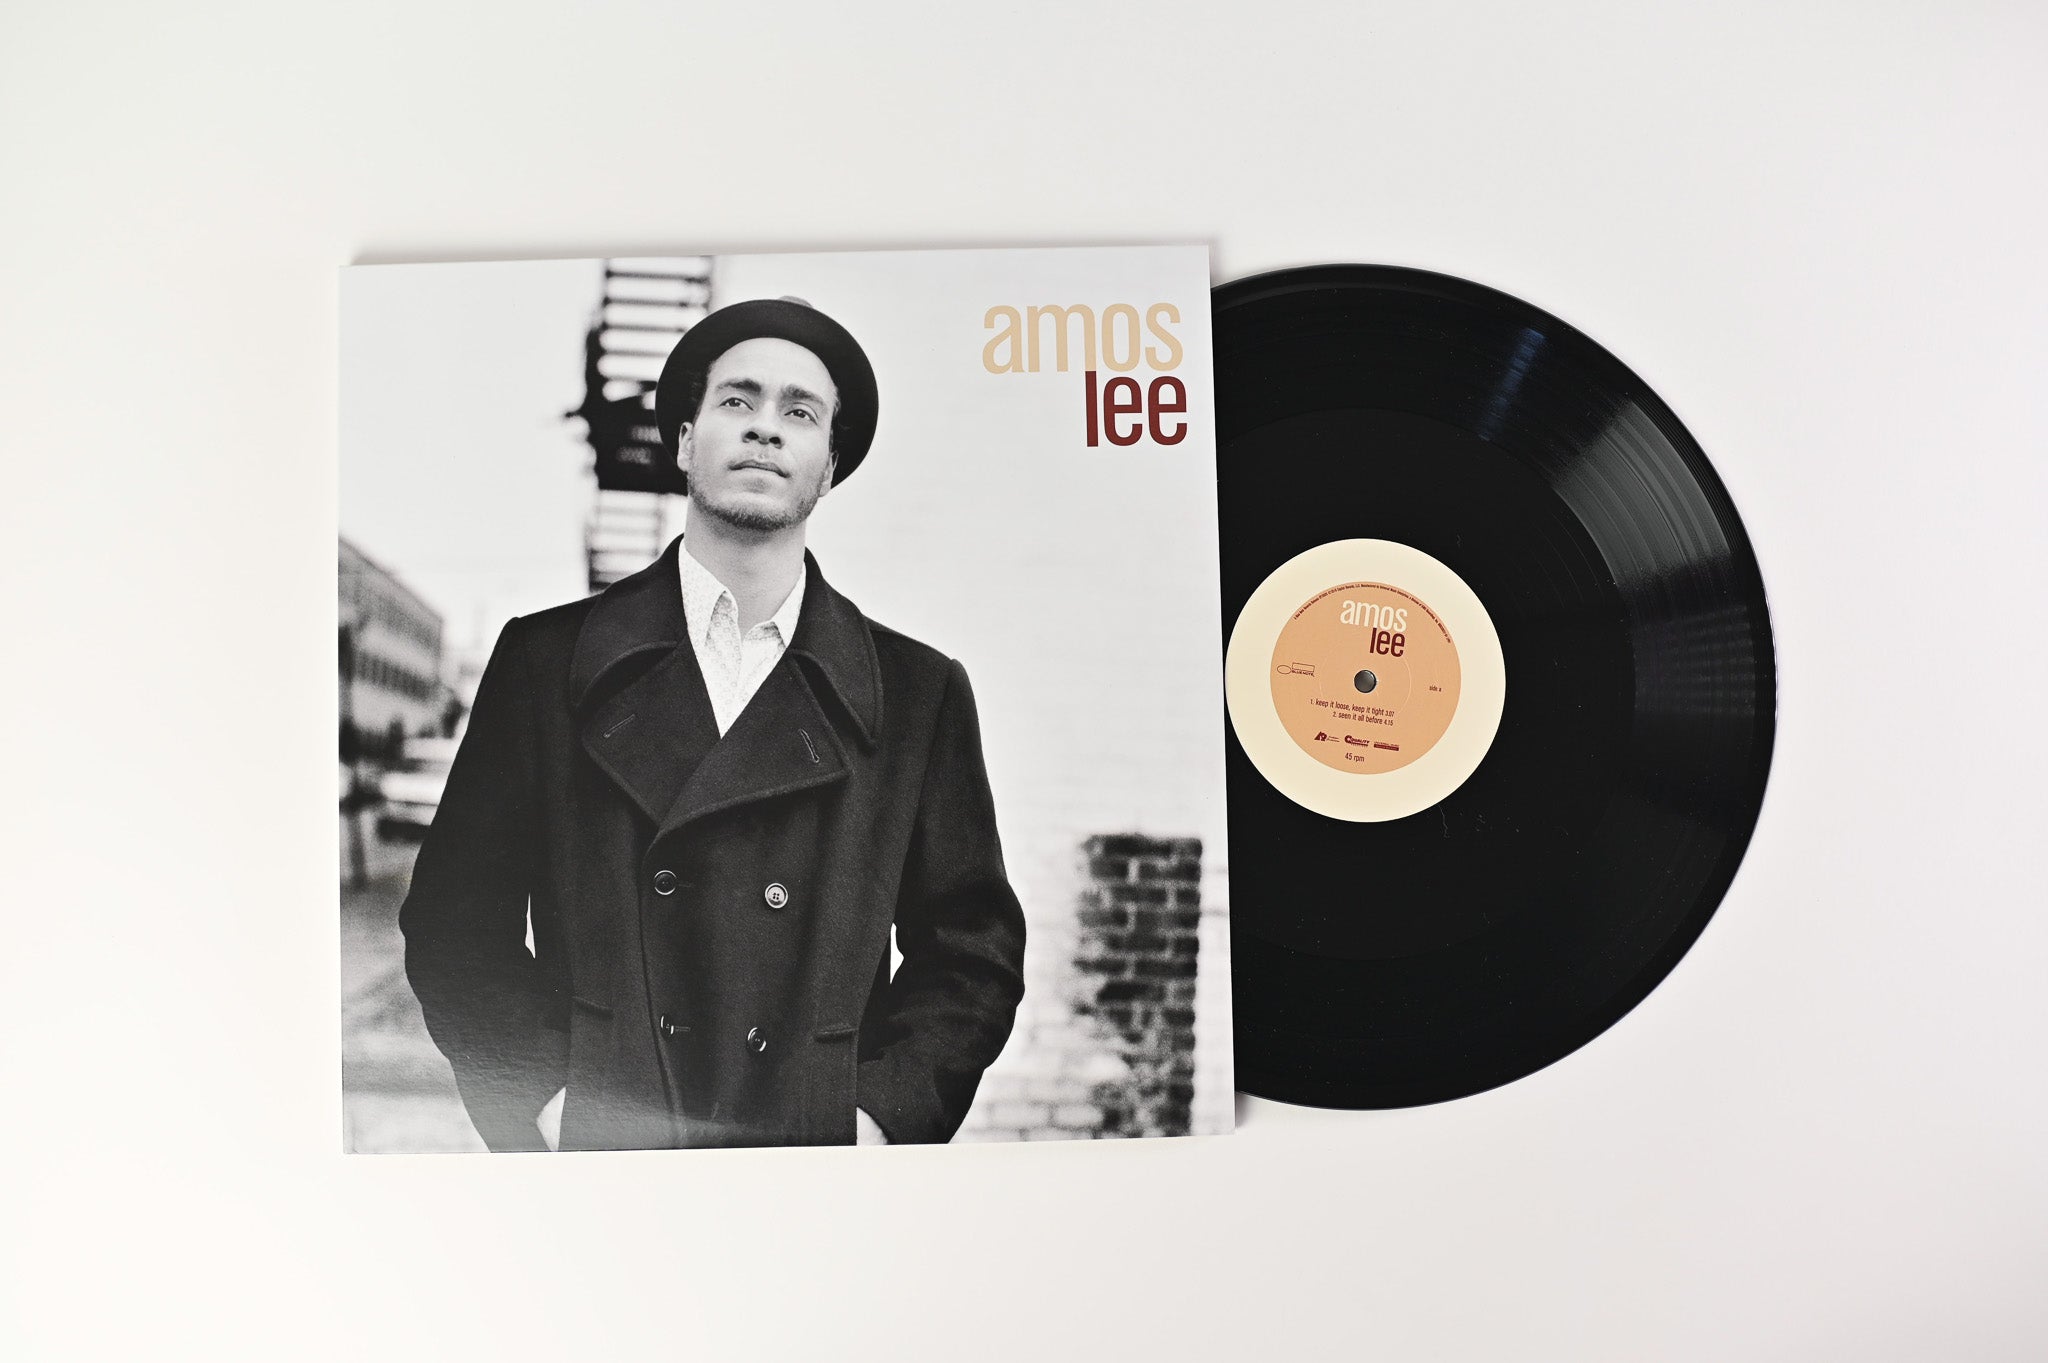 Amos Lee - Amos Lee on Blue Note Analogue Productions 45 RPM Reissue